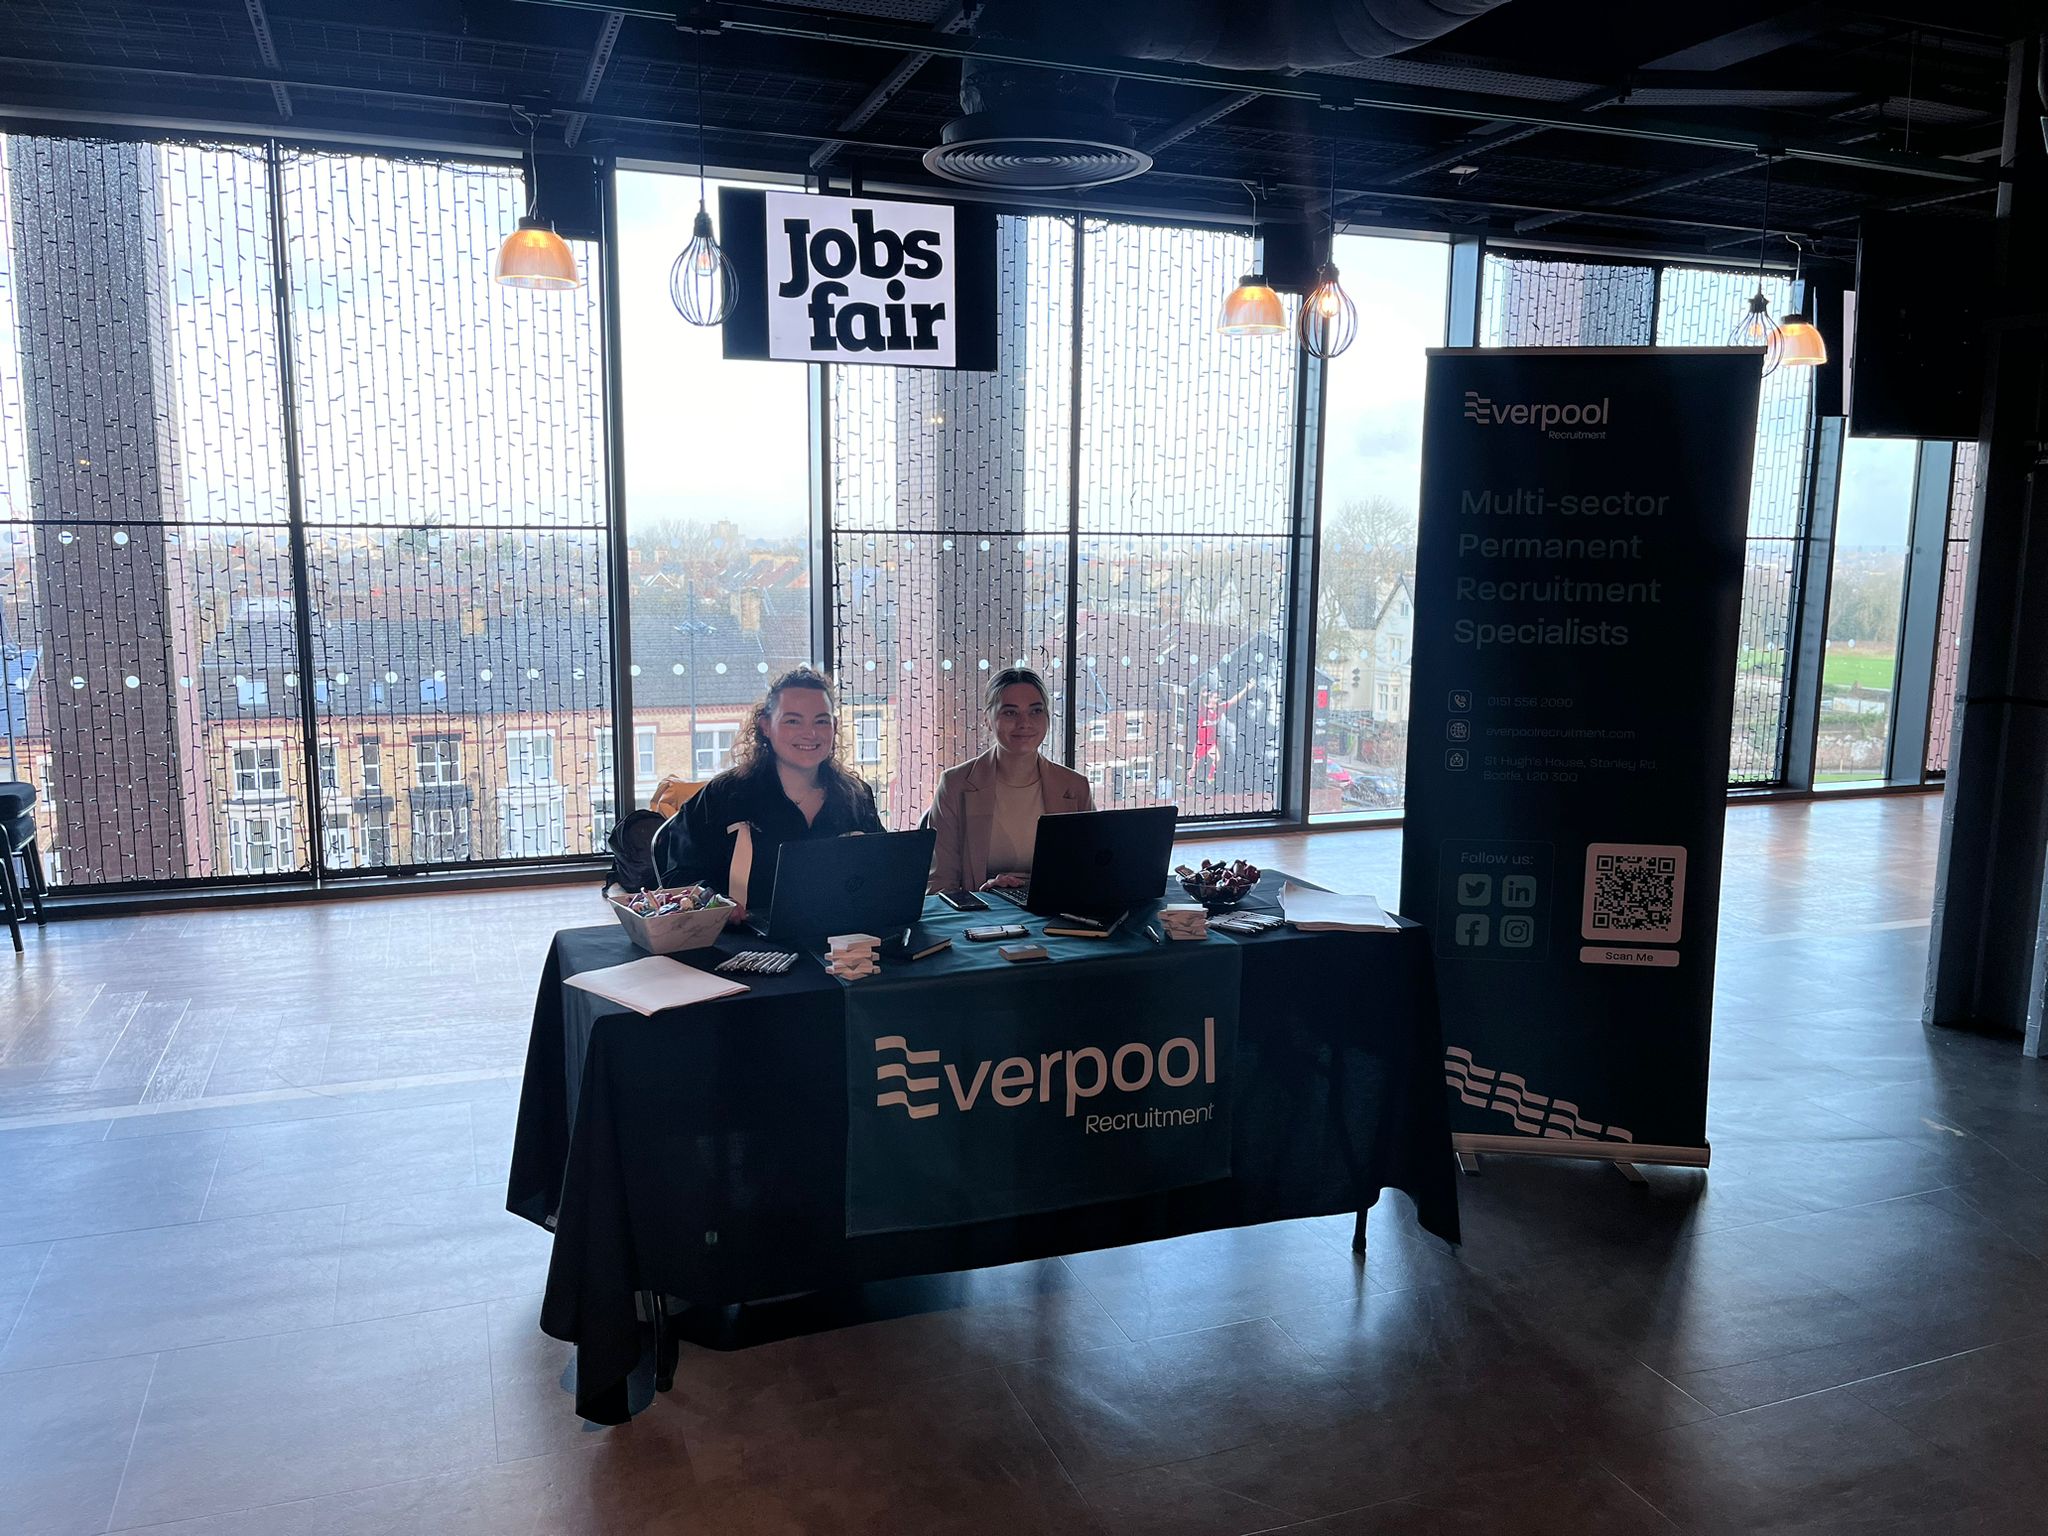 Everpool at our event in Liverpool